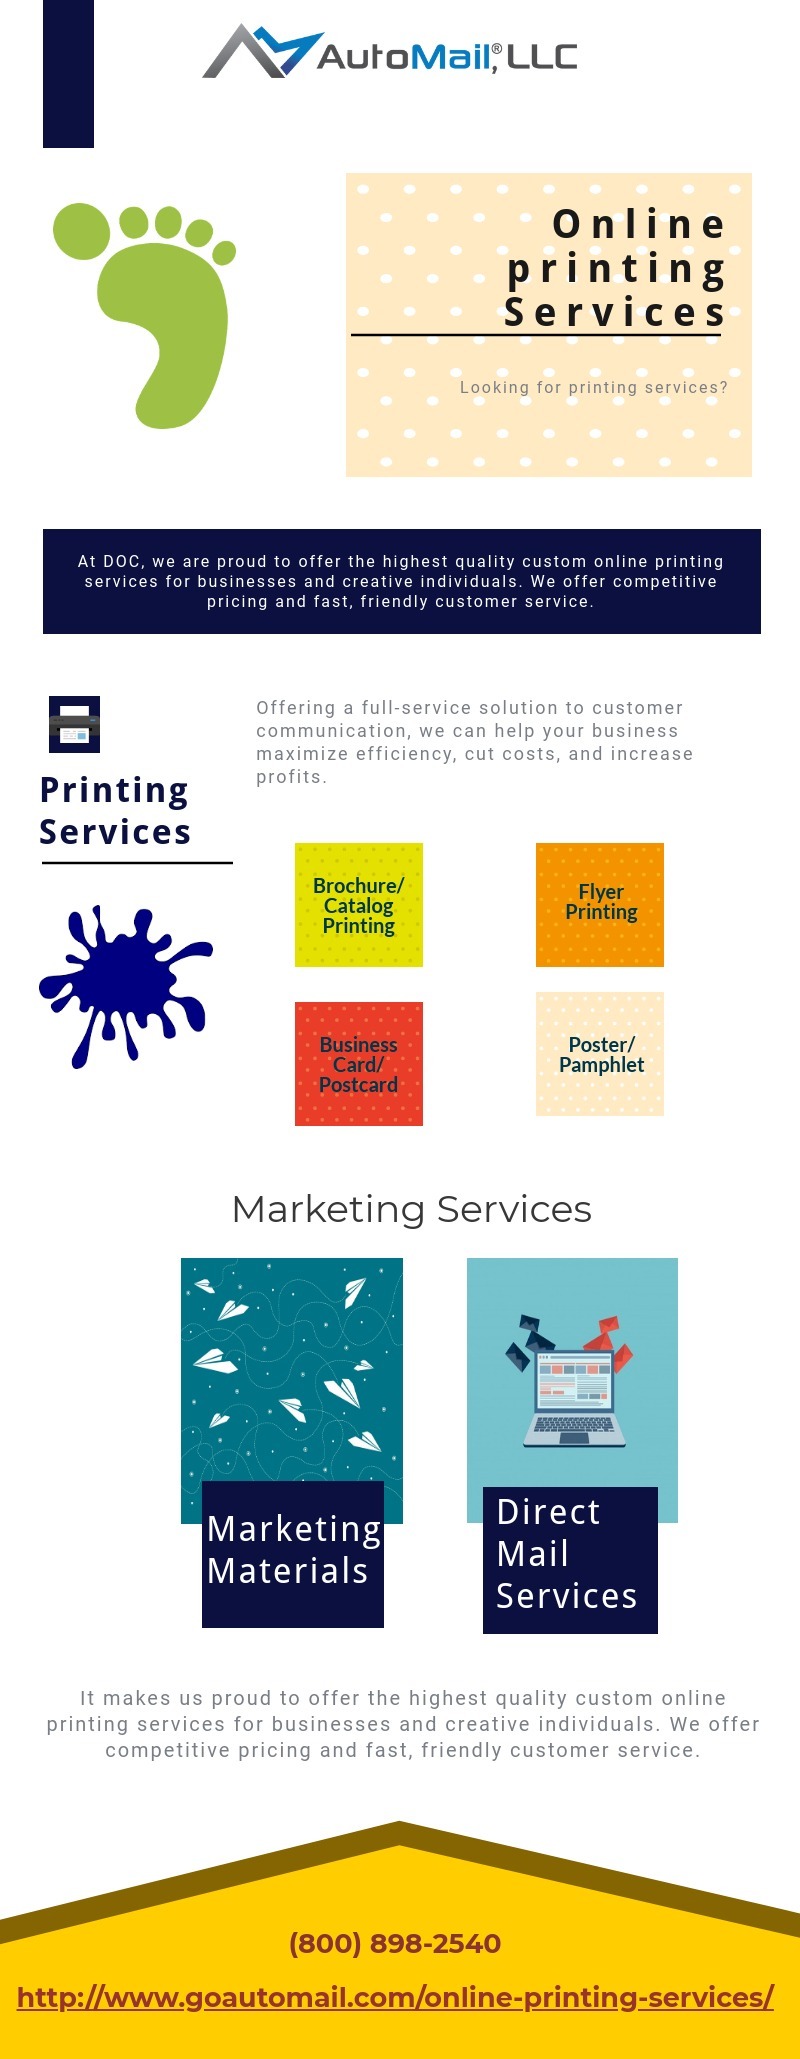 Online Printing Services - Doc Output